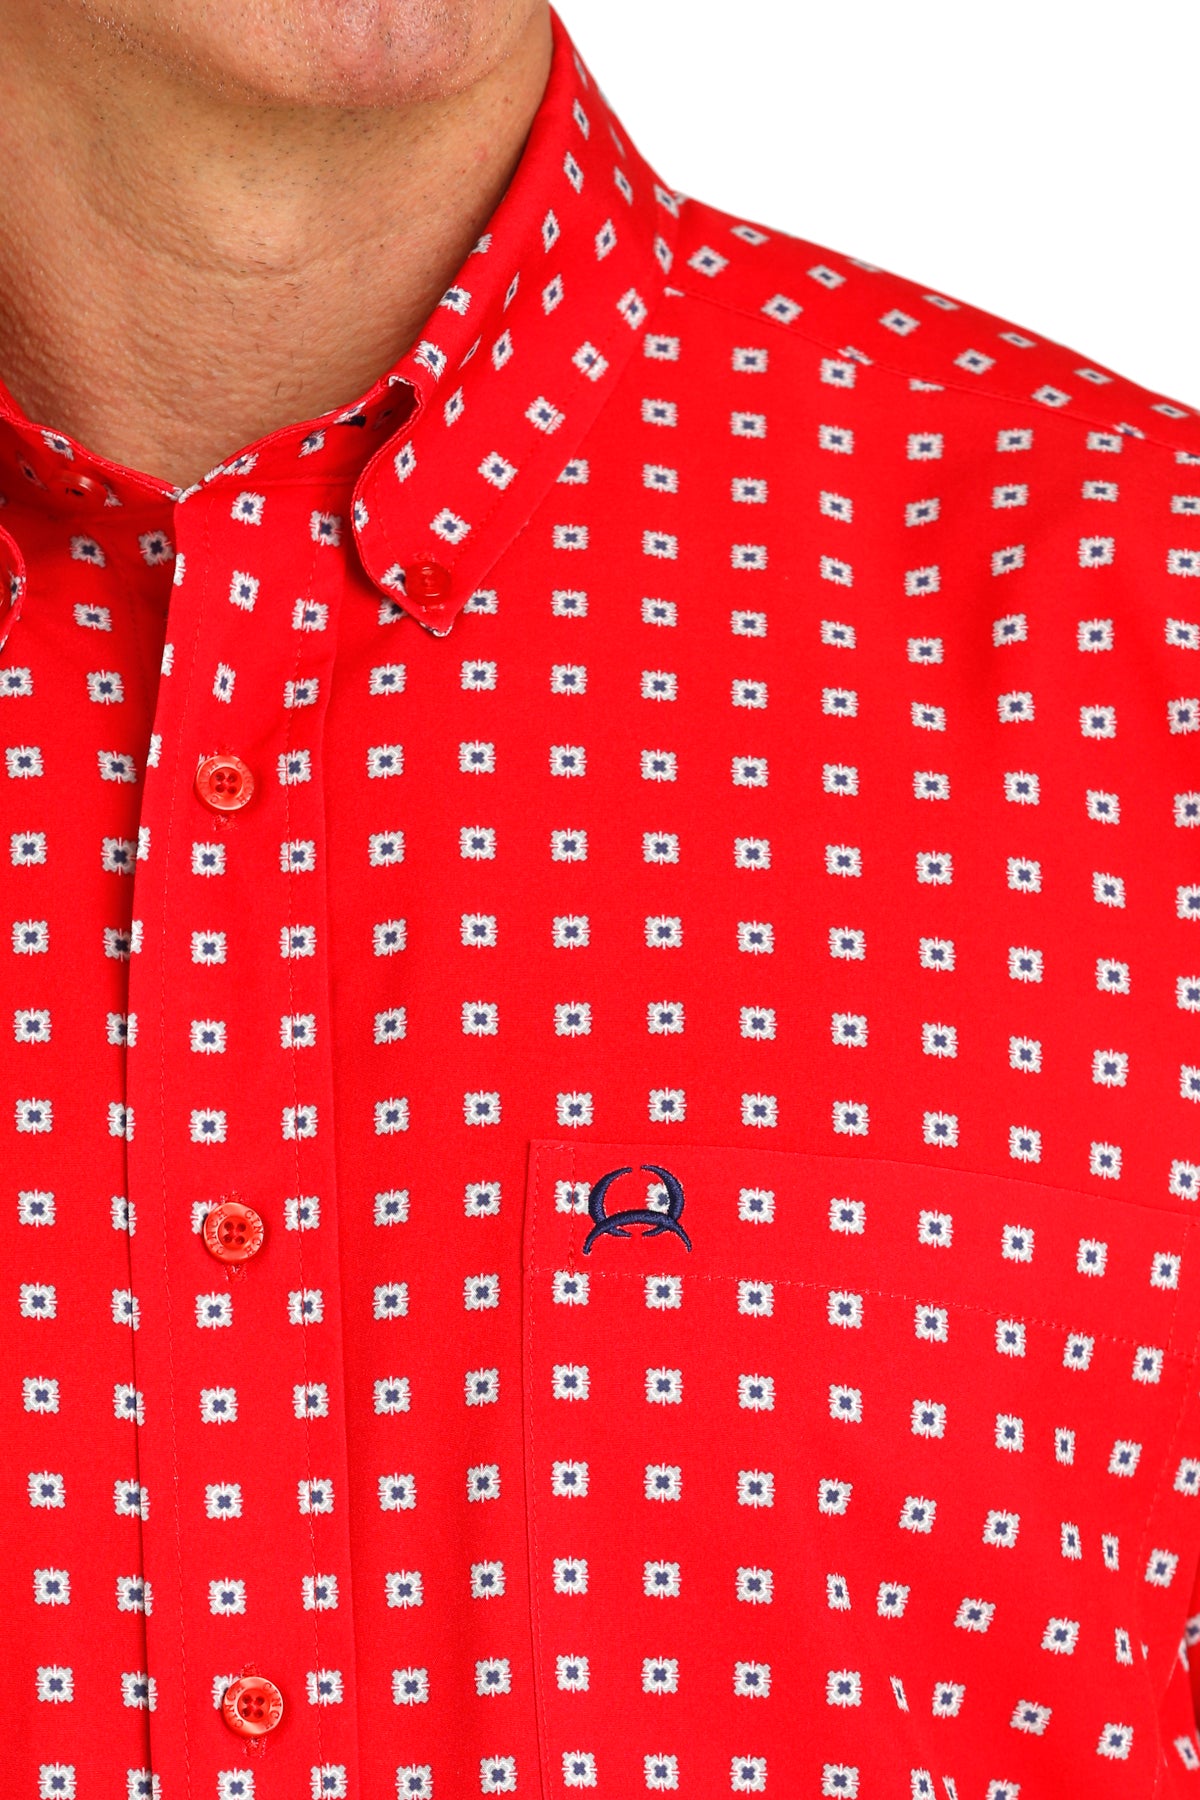 Cinch Men's S/S Arenaflex Geometric Square Western Button Down Shirt in Red